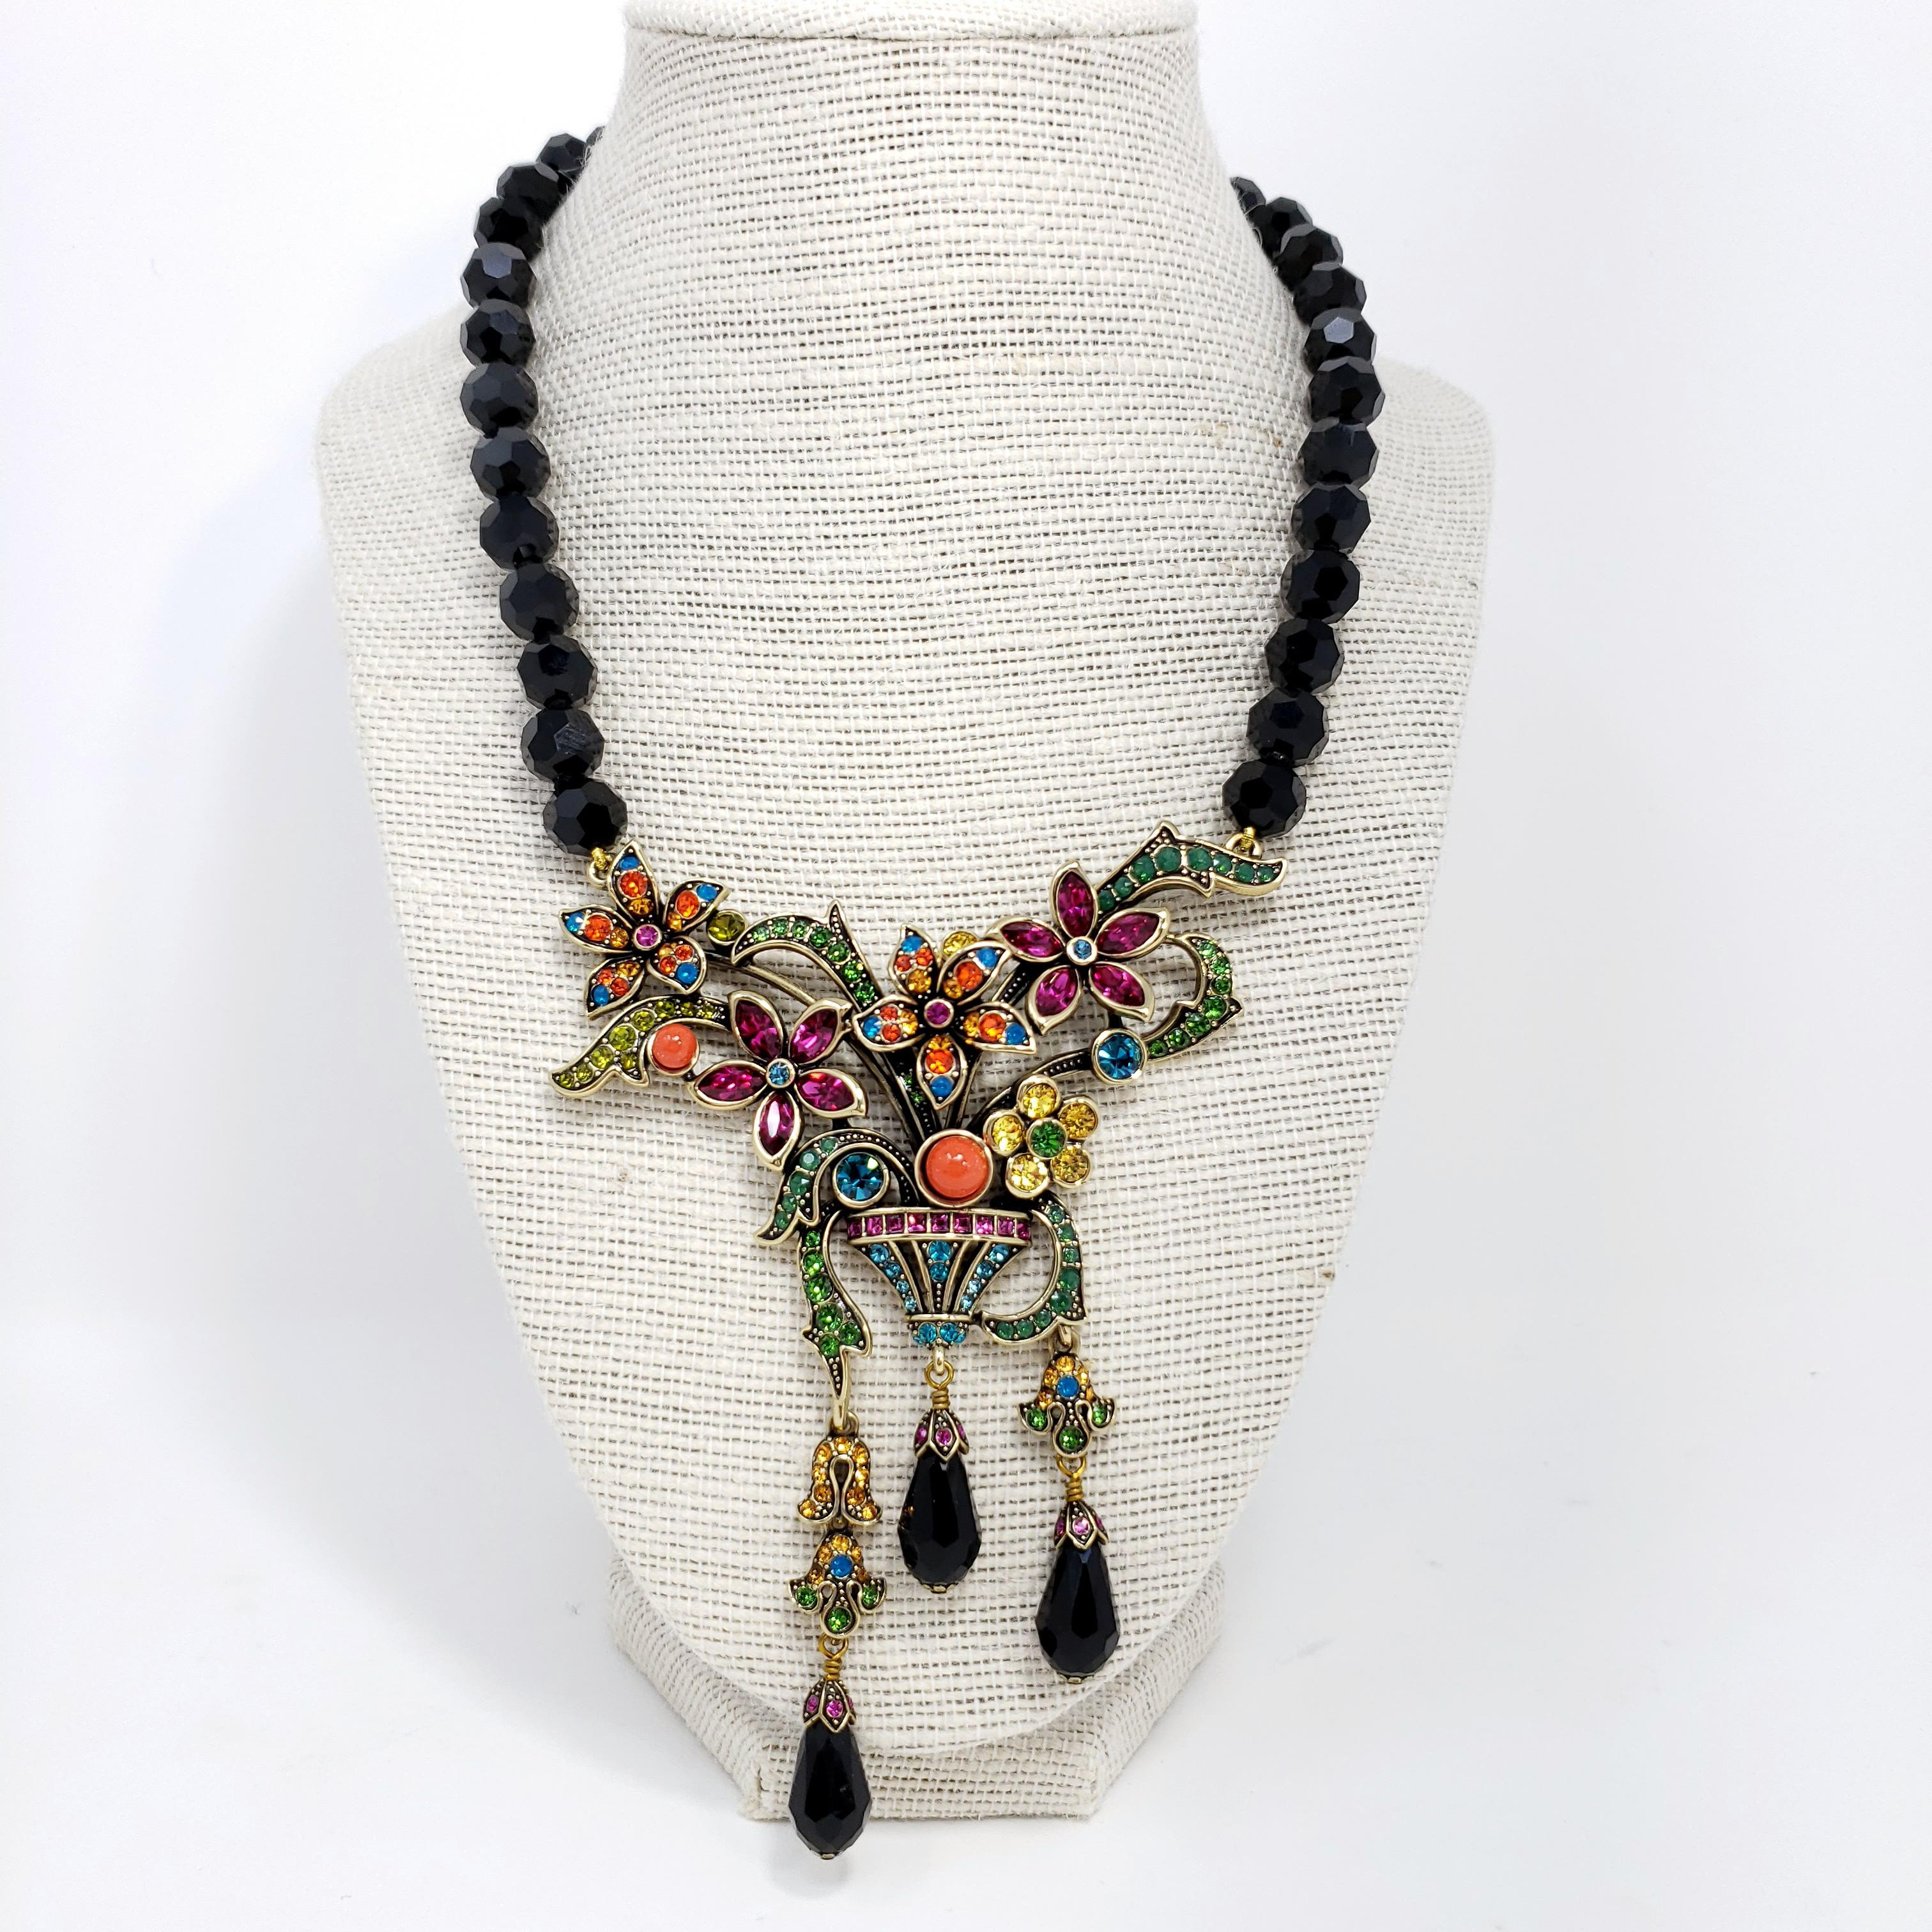 A garden of glamour! This colorful statement necklace is a wearable floral bouquet. A single strand of individually knotted faceted jet beads leads to a stunning floral designed center station drop with fancy cut bezel and pave set Swarovski